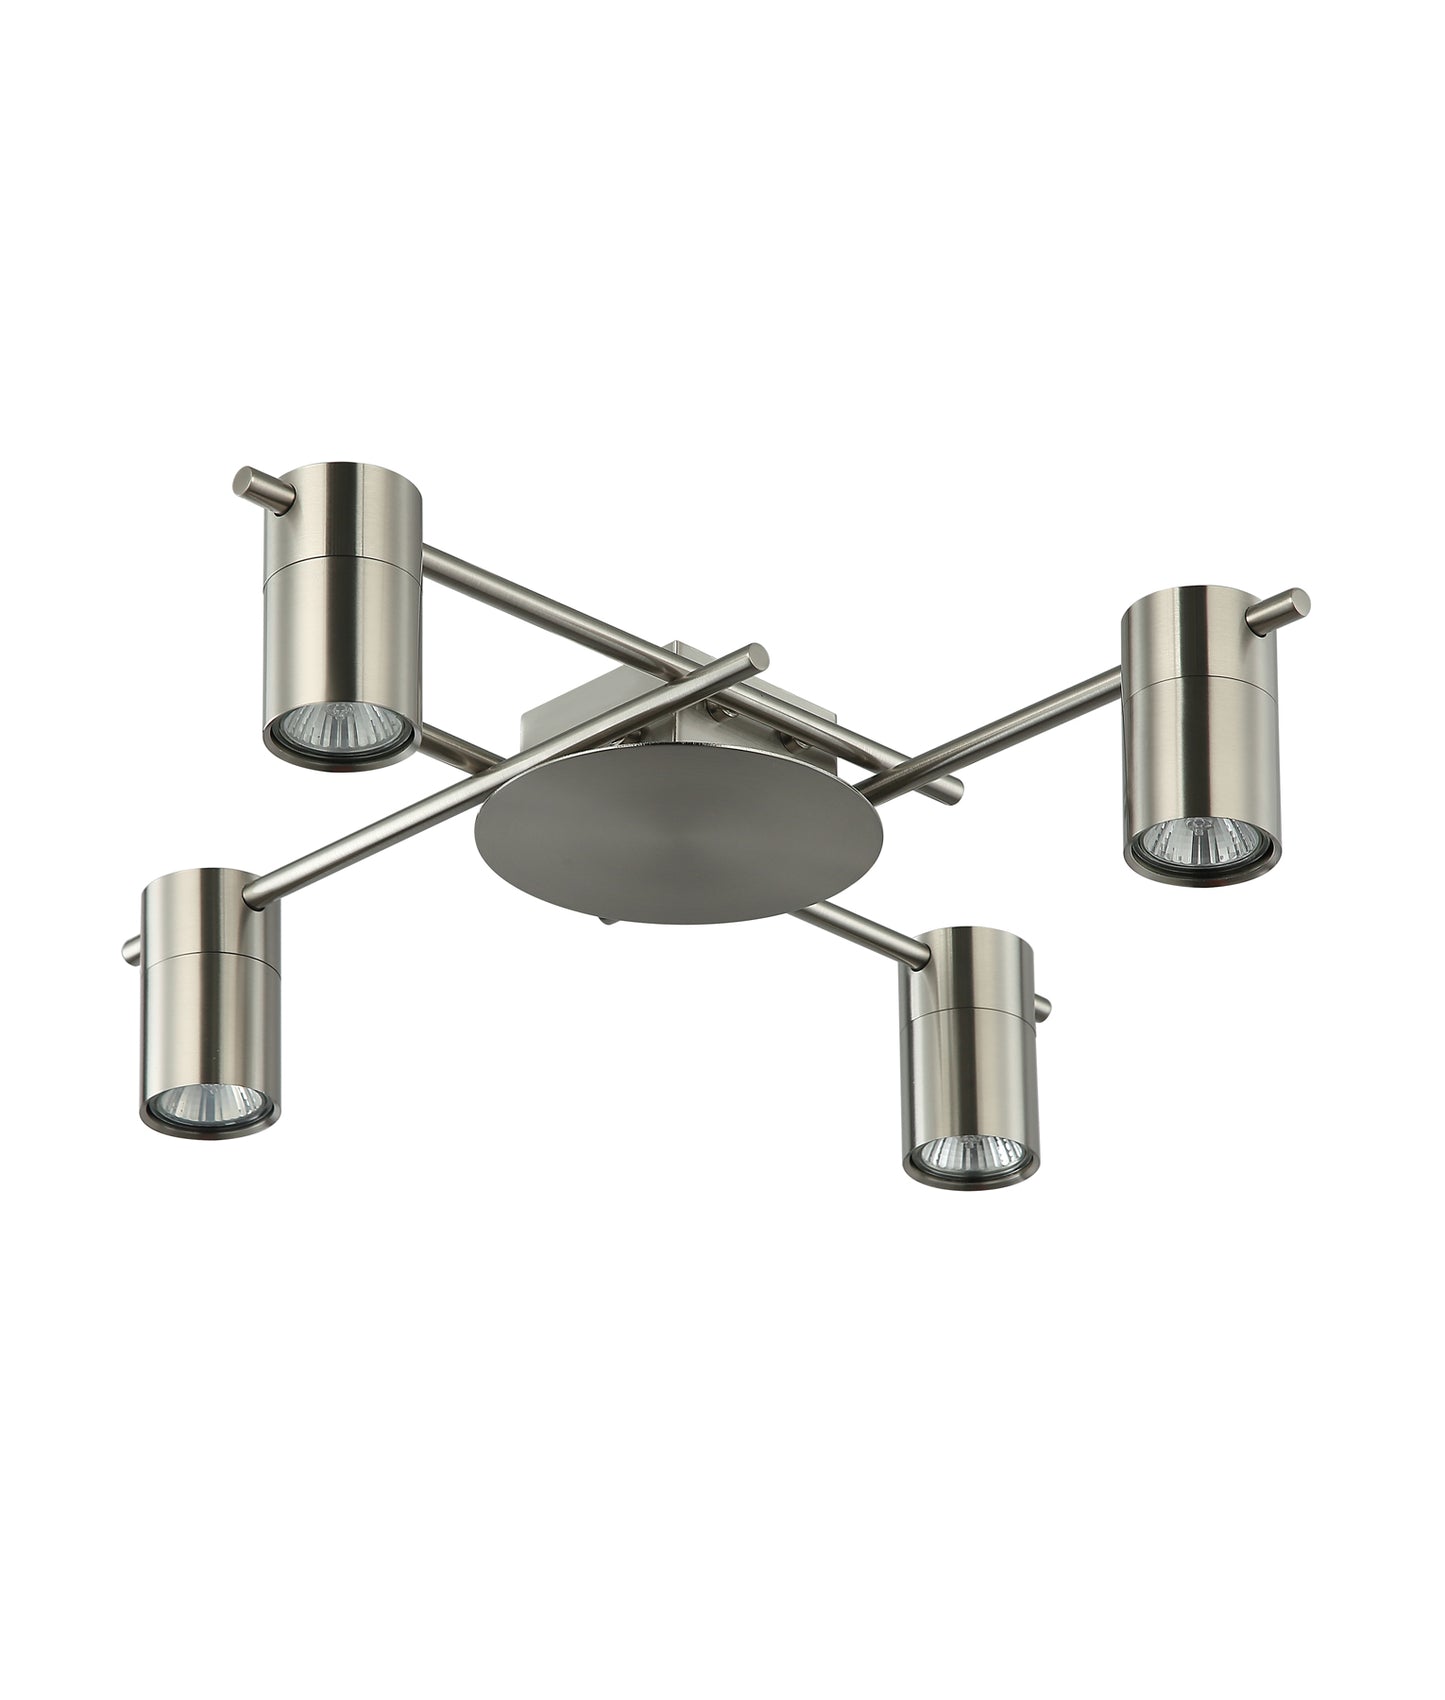 TACHE: Interior Spot Ceiling Lights (with Adjustable Chrome Heads) IP20